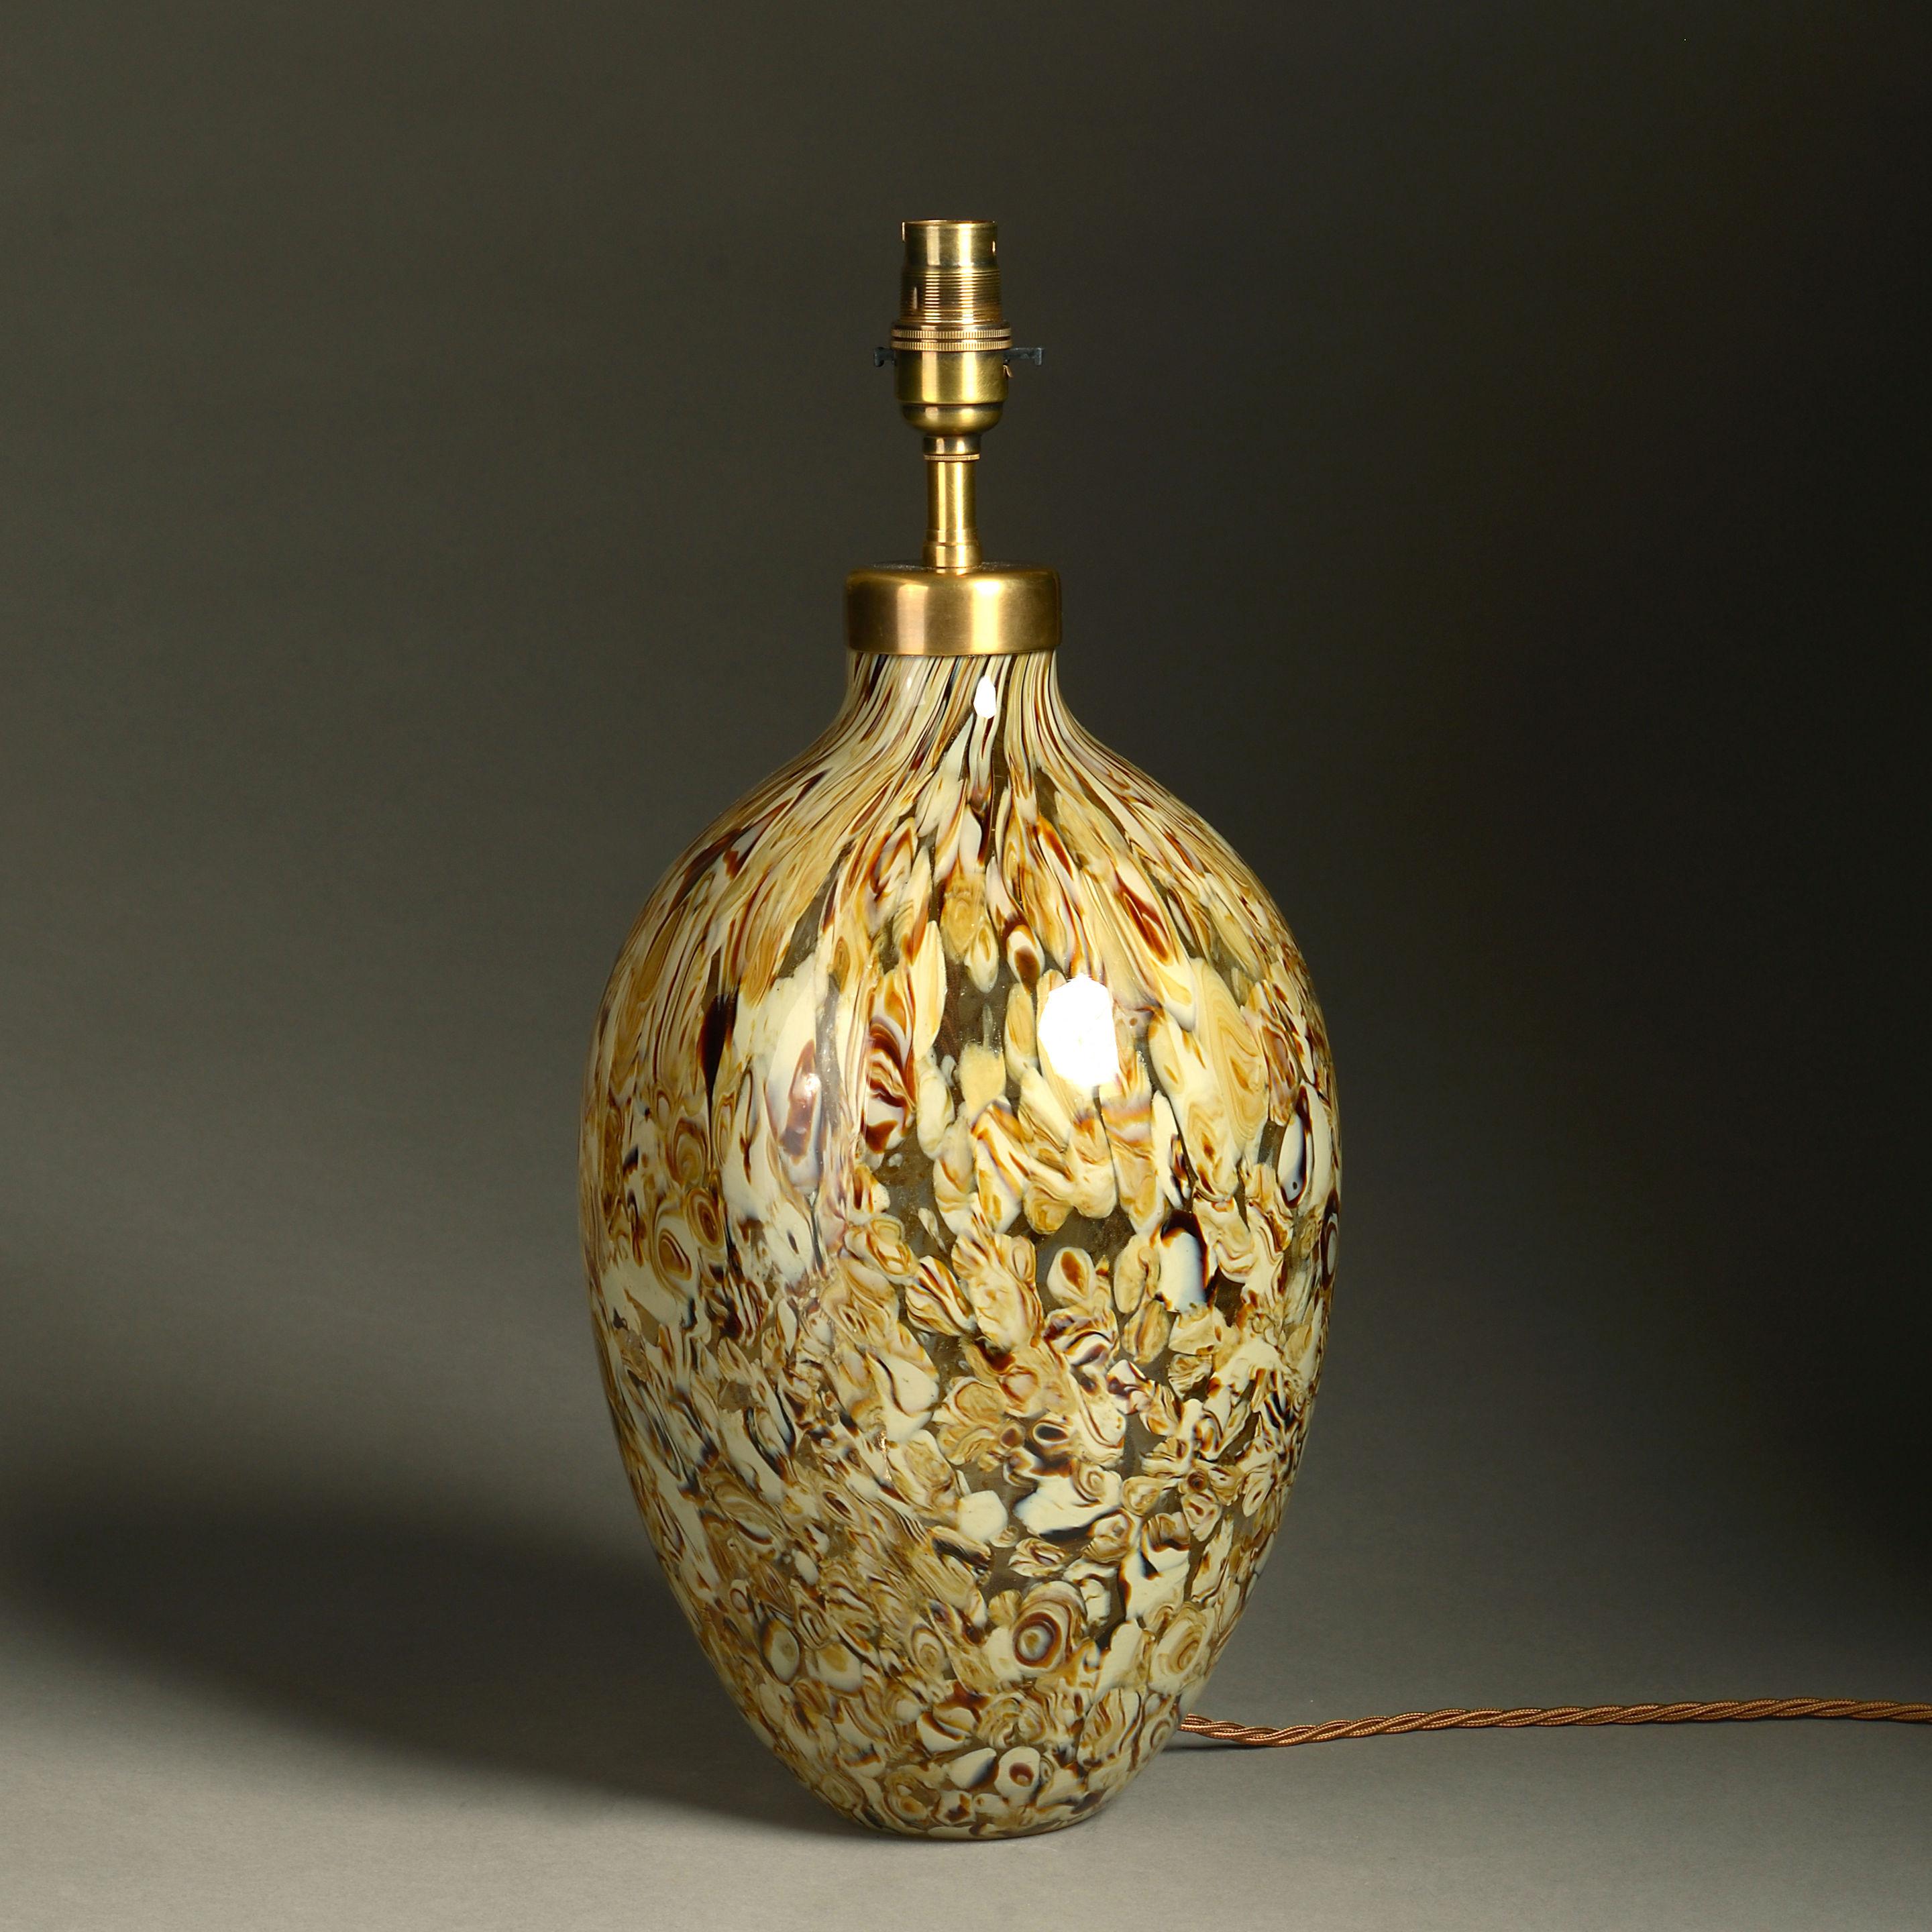 A mid-20th century art glass vase now wired as a lamp base.
 